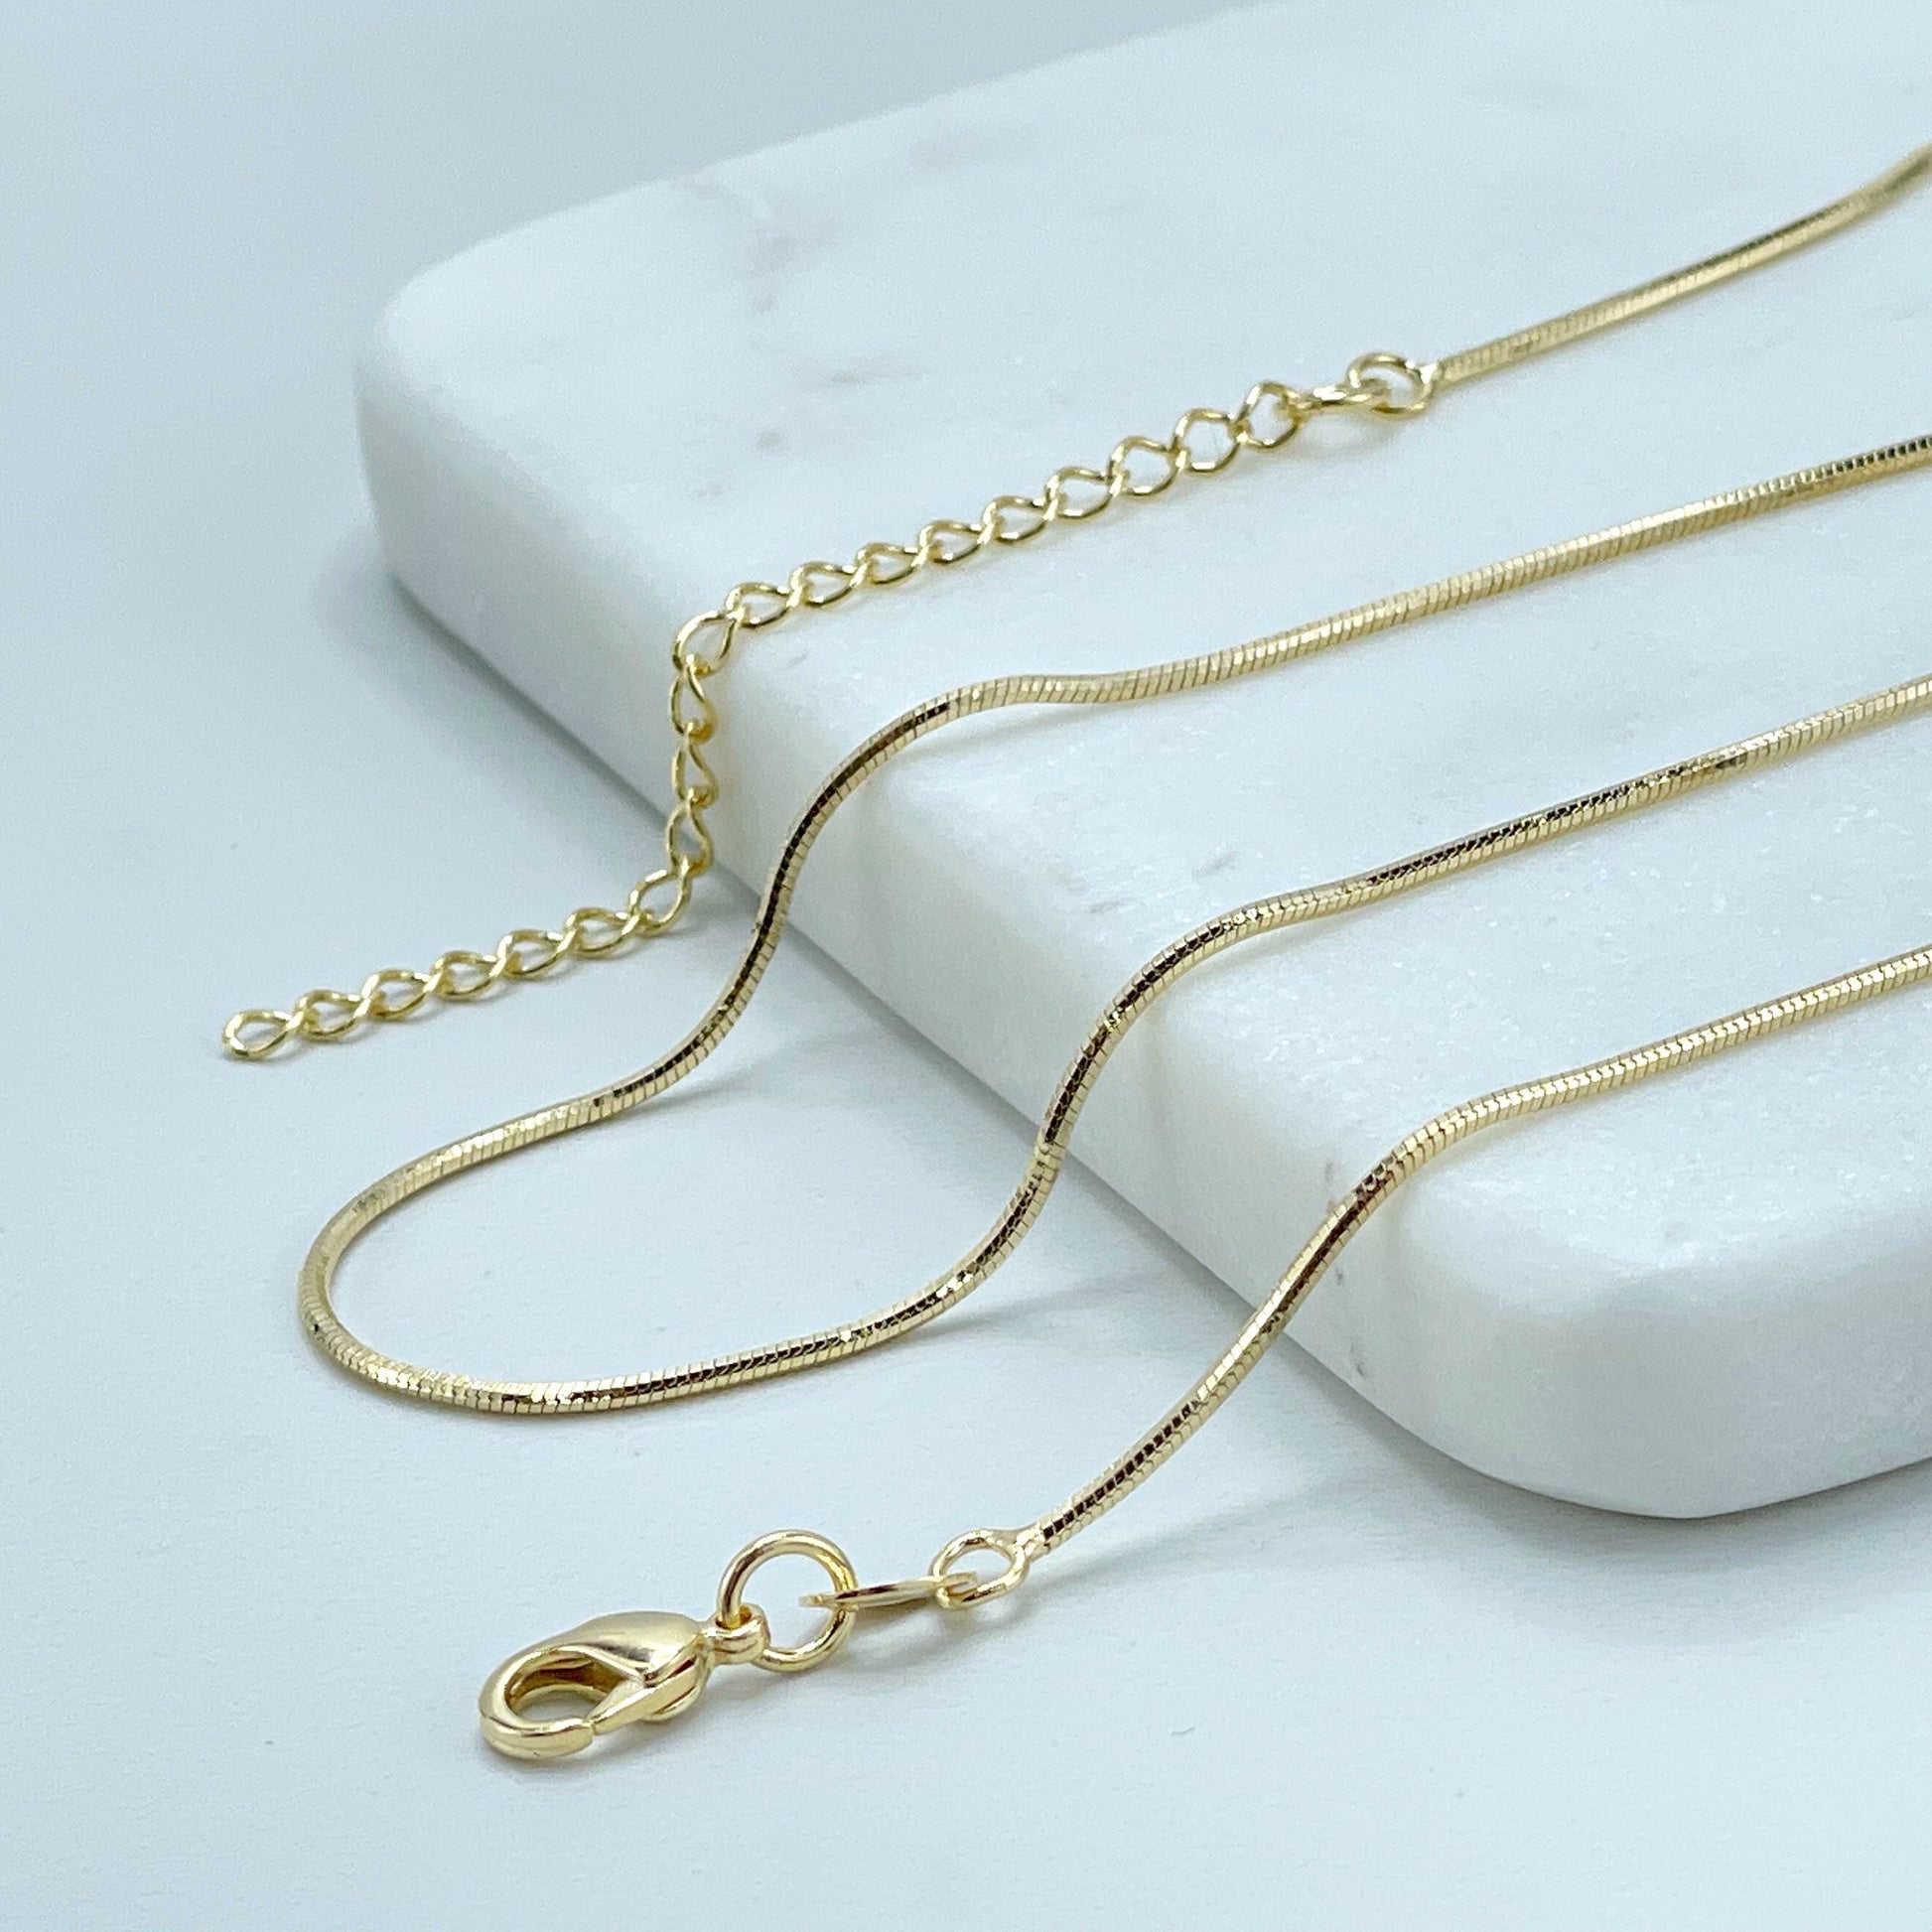  14k Gold Filled 1mm Necklace Extender Chain 1, 2, 3